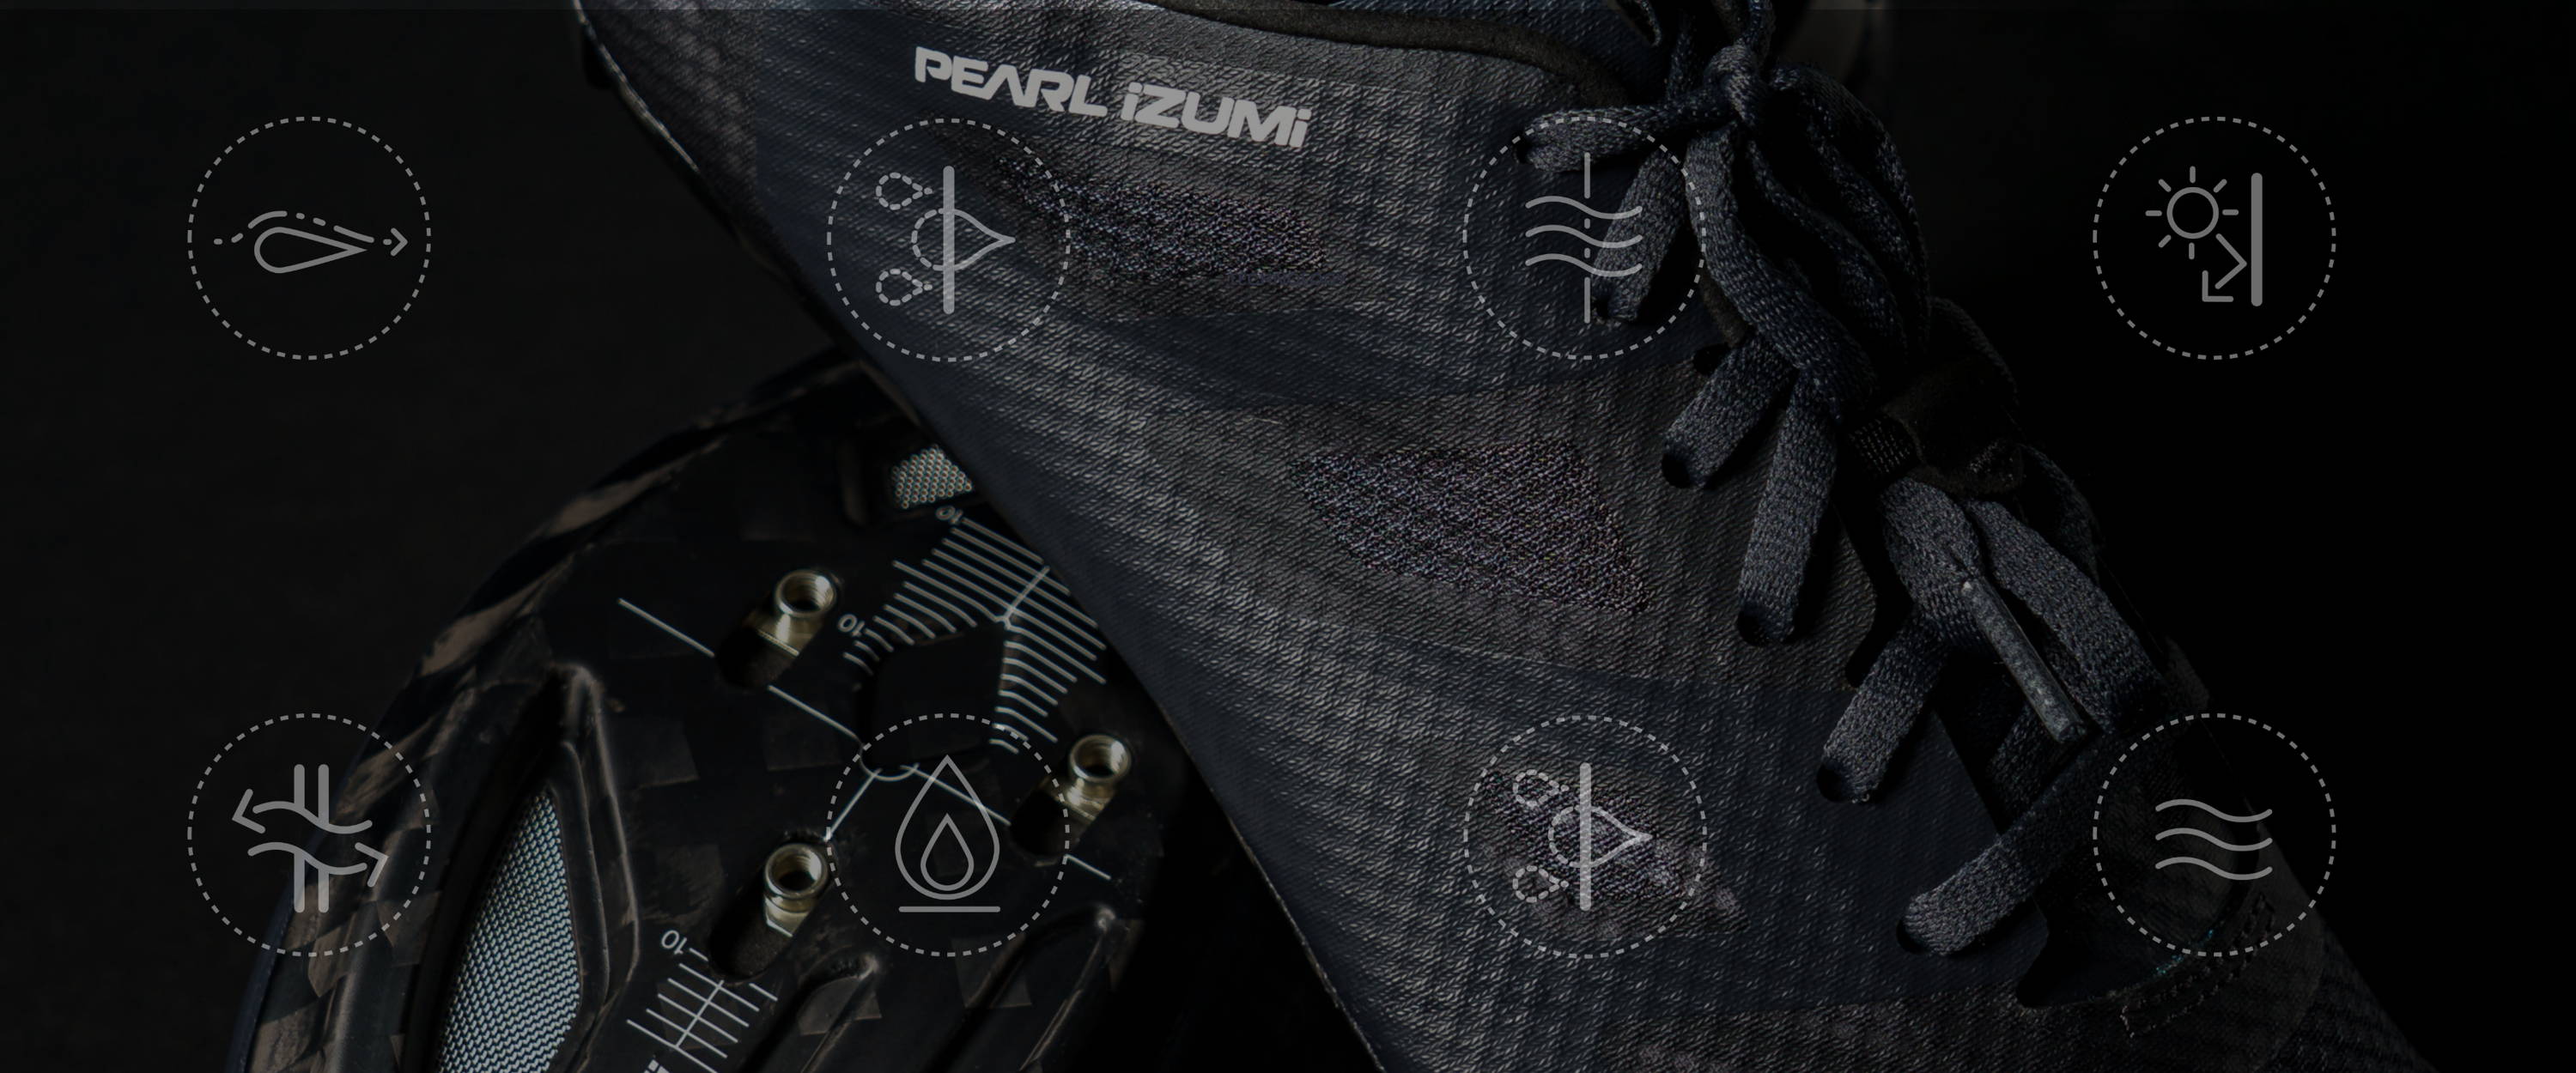 Close up shot of black PEARL iZUMi road cycling shoes with technology iconography overlays highlighting various technologies.